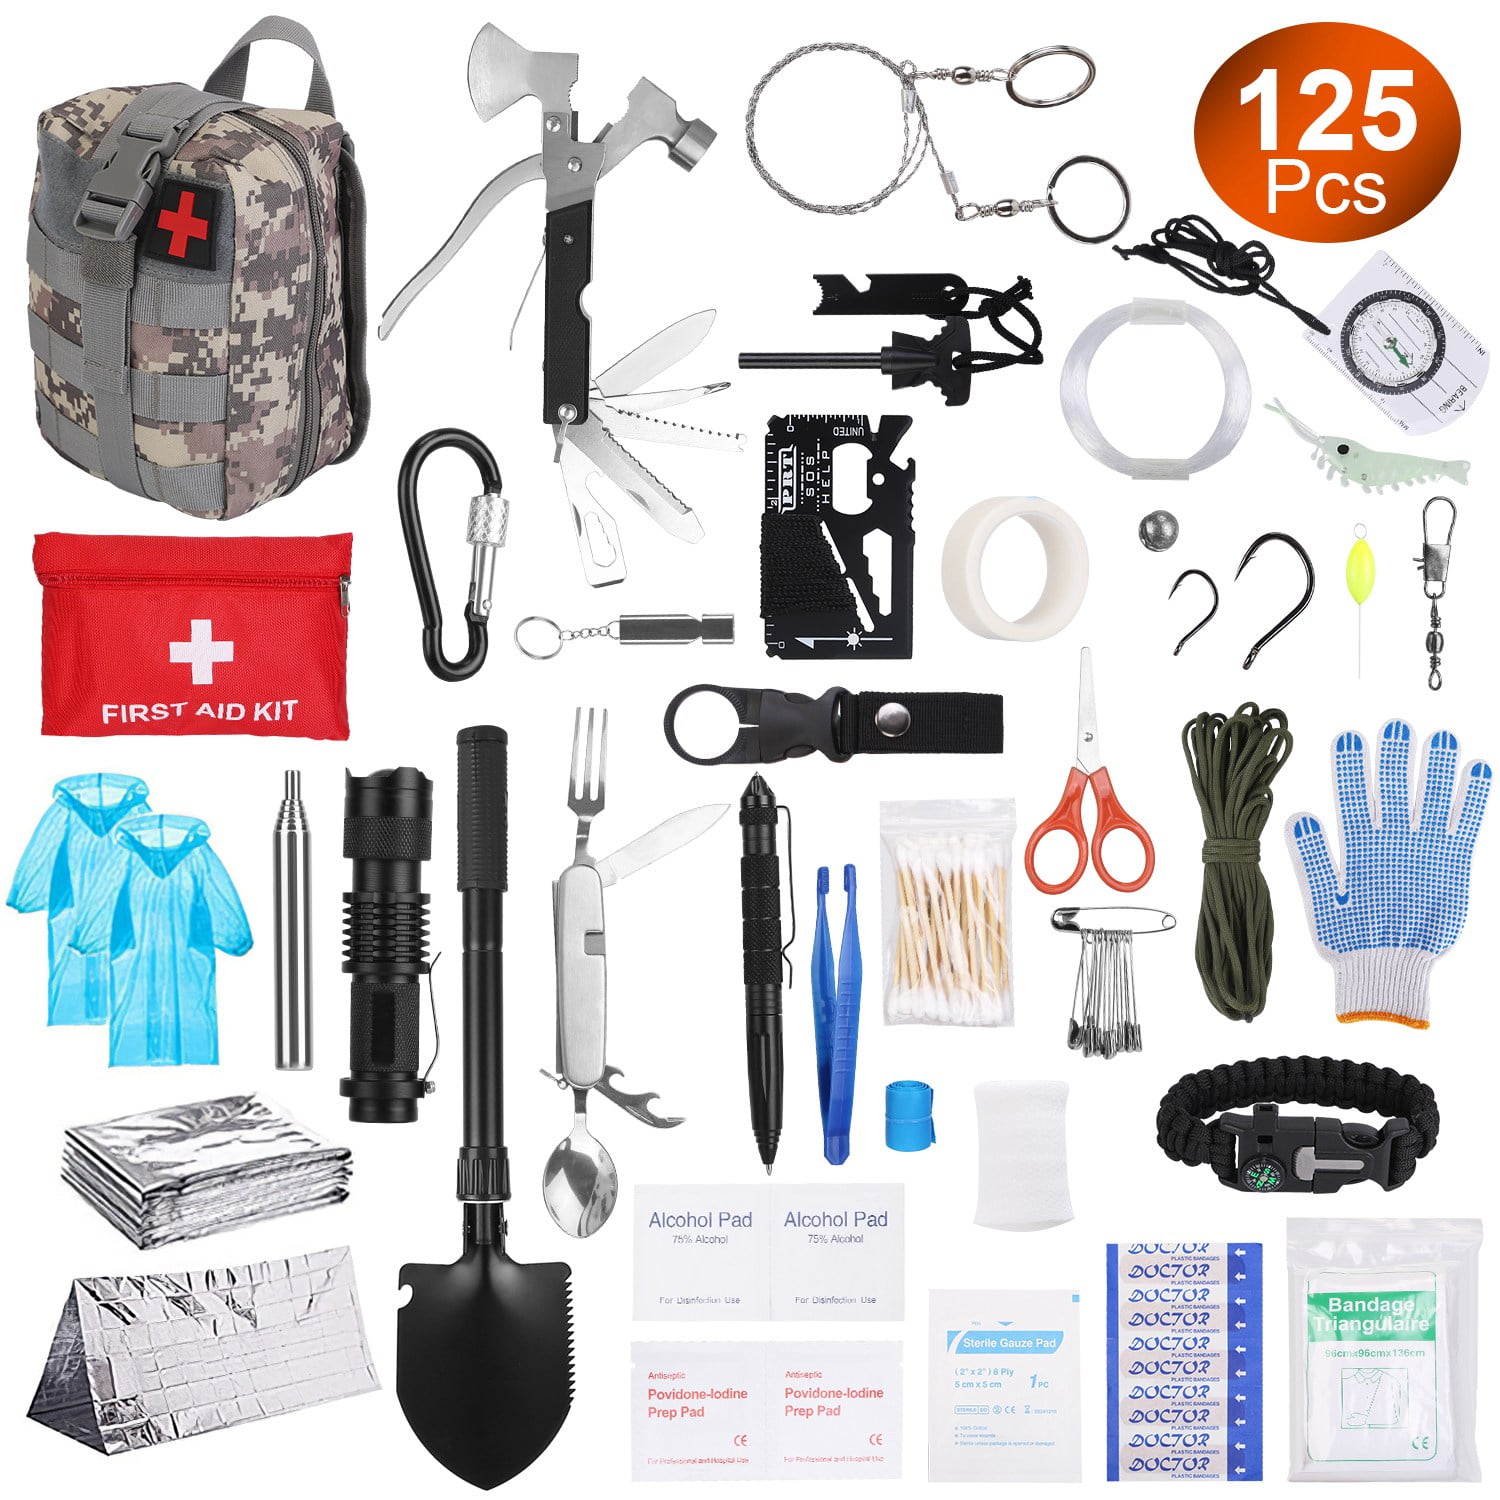 125 Pieces Survival First Aid Kit, iMounTEK Outdoor Gear Emergency Kits  Trauma Bag for Camping Boat Hunting Hiking Home Car Earthquake and  Adventures